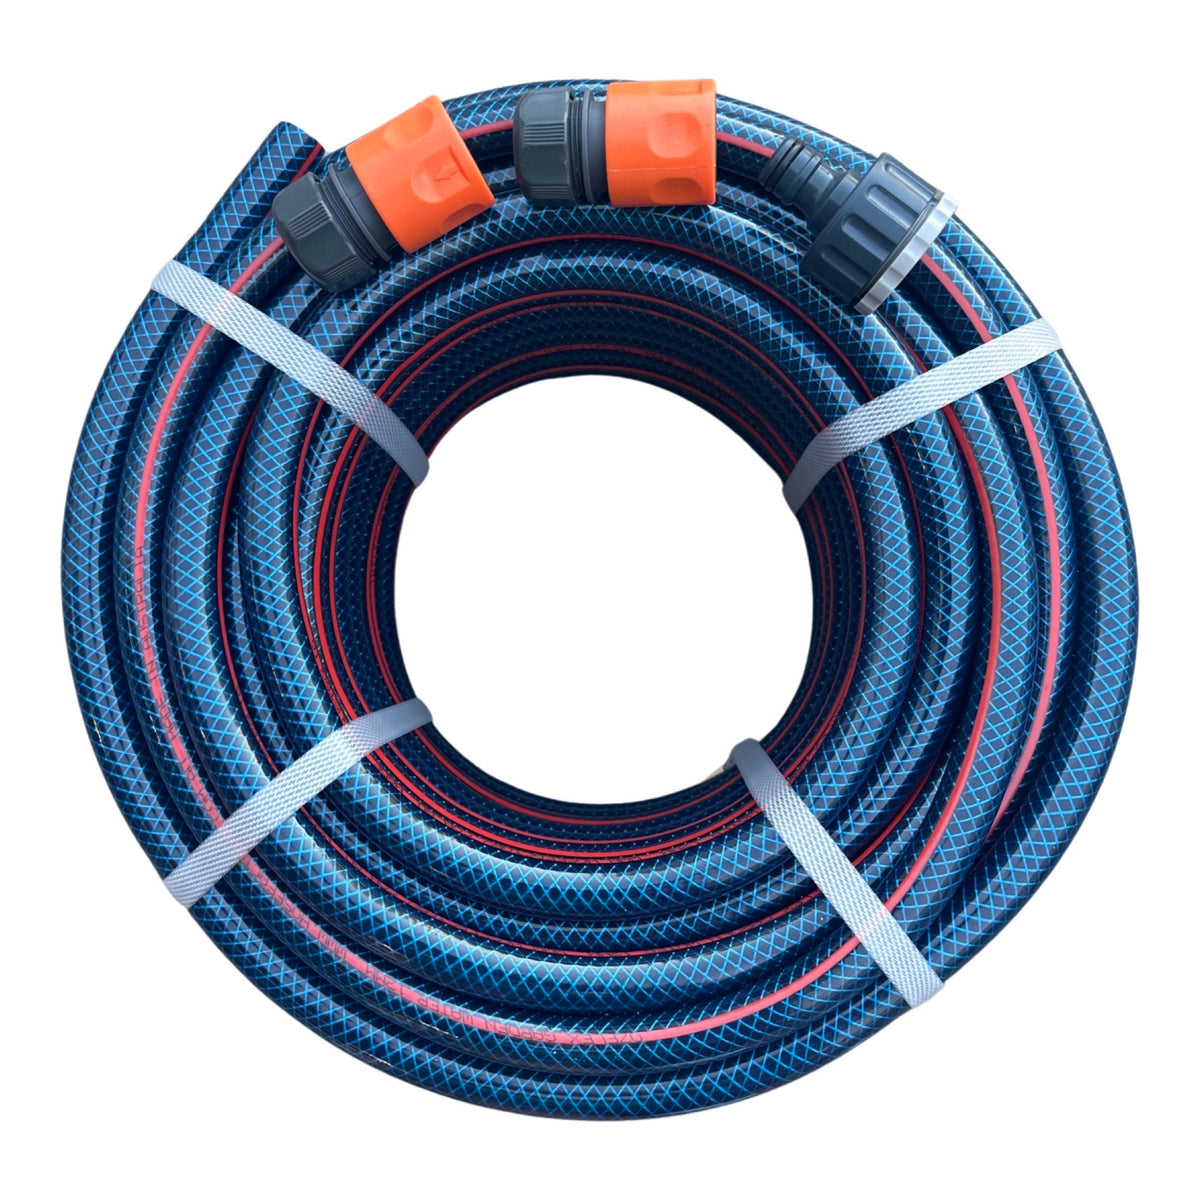 OZFLEX Flexible Garden Water Hose with 3 Piece Plastic Fittings